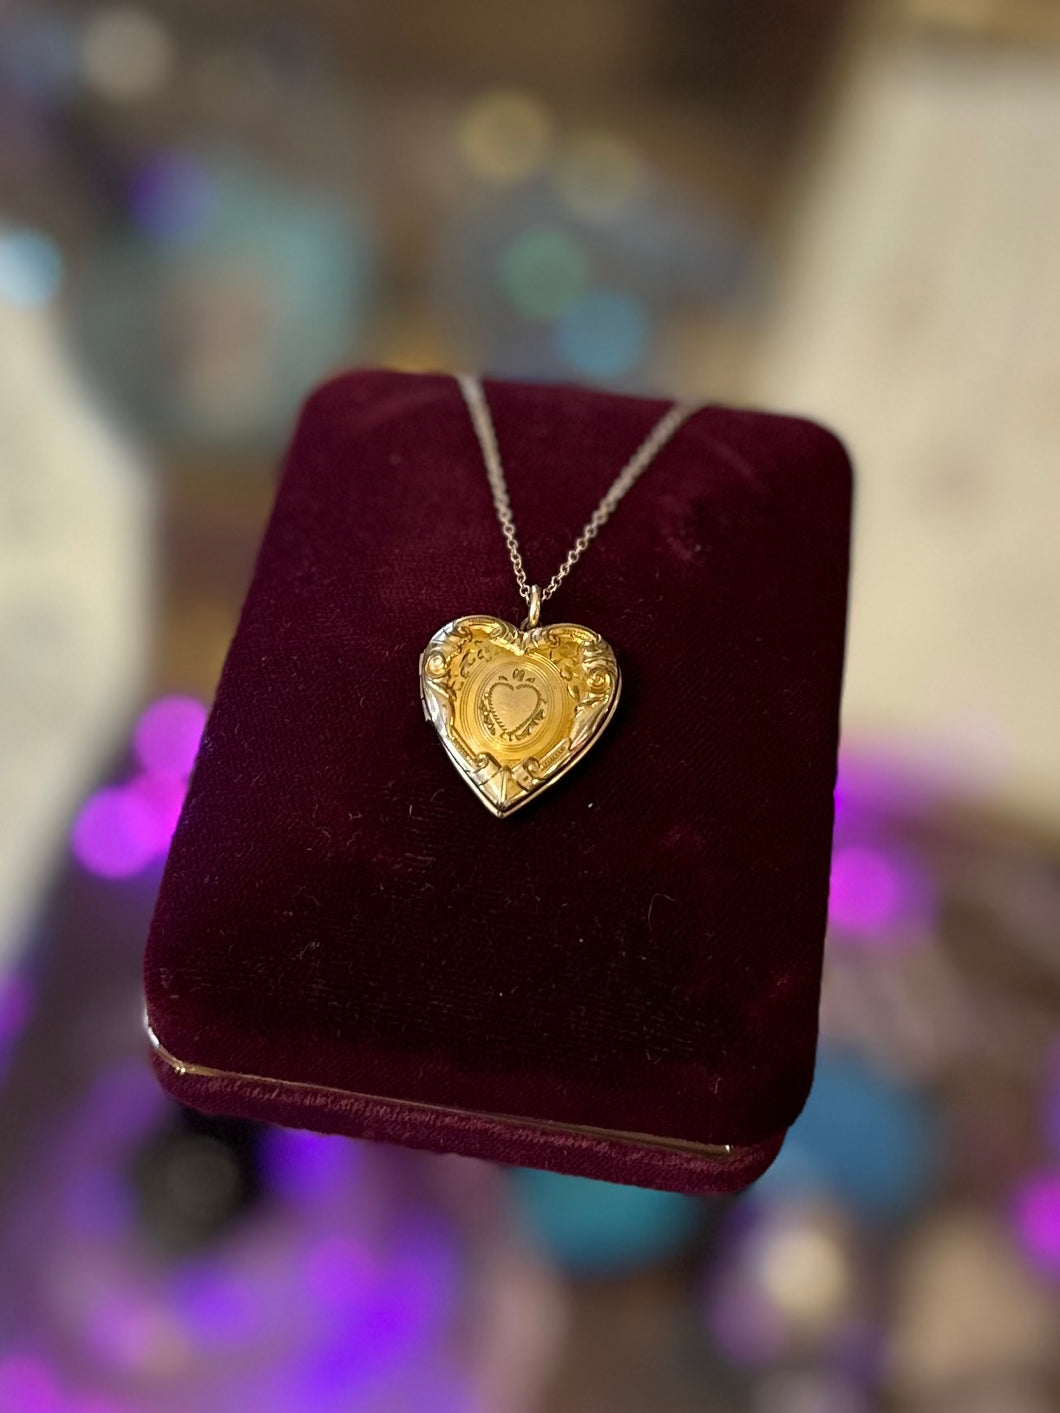 Vintage WWII Era 1940s Sweetheart Gold Filled Heart Locket on Dainty Gold Plated Sterling Silver Chain Pendant Necklace 17.75”